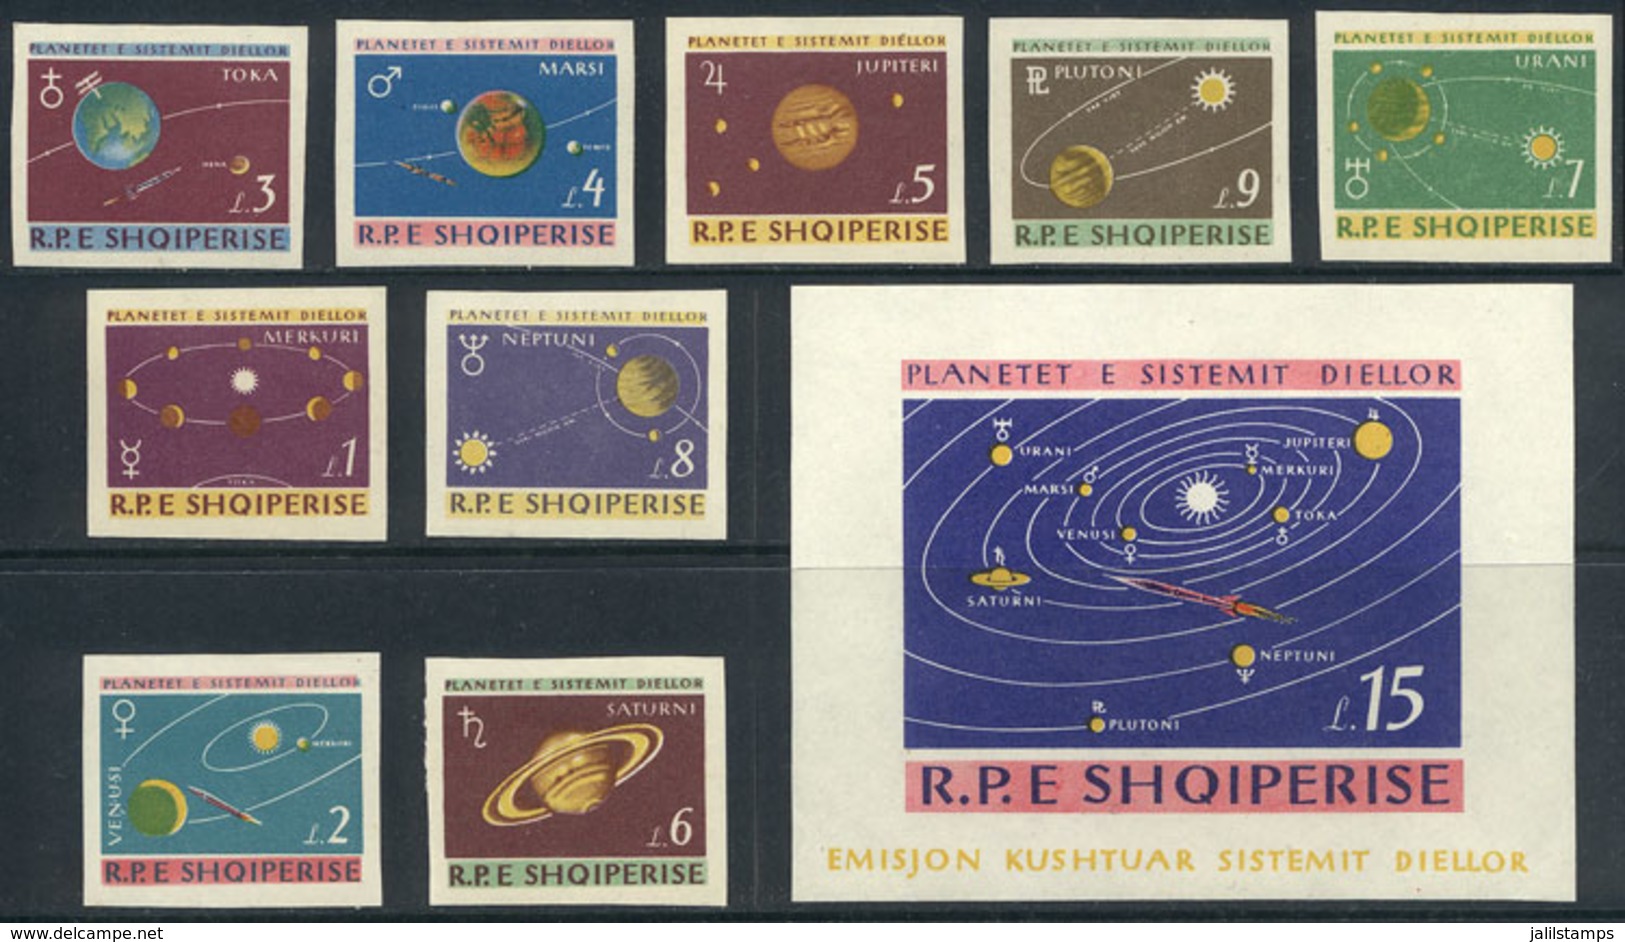 ALBANIA: Yvert 729/37 + Souvenir Sheet 6N IMPERFORATE, 1964 Planets, Complete Set Unmounted, Excellent Quality! - Albania